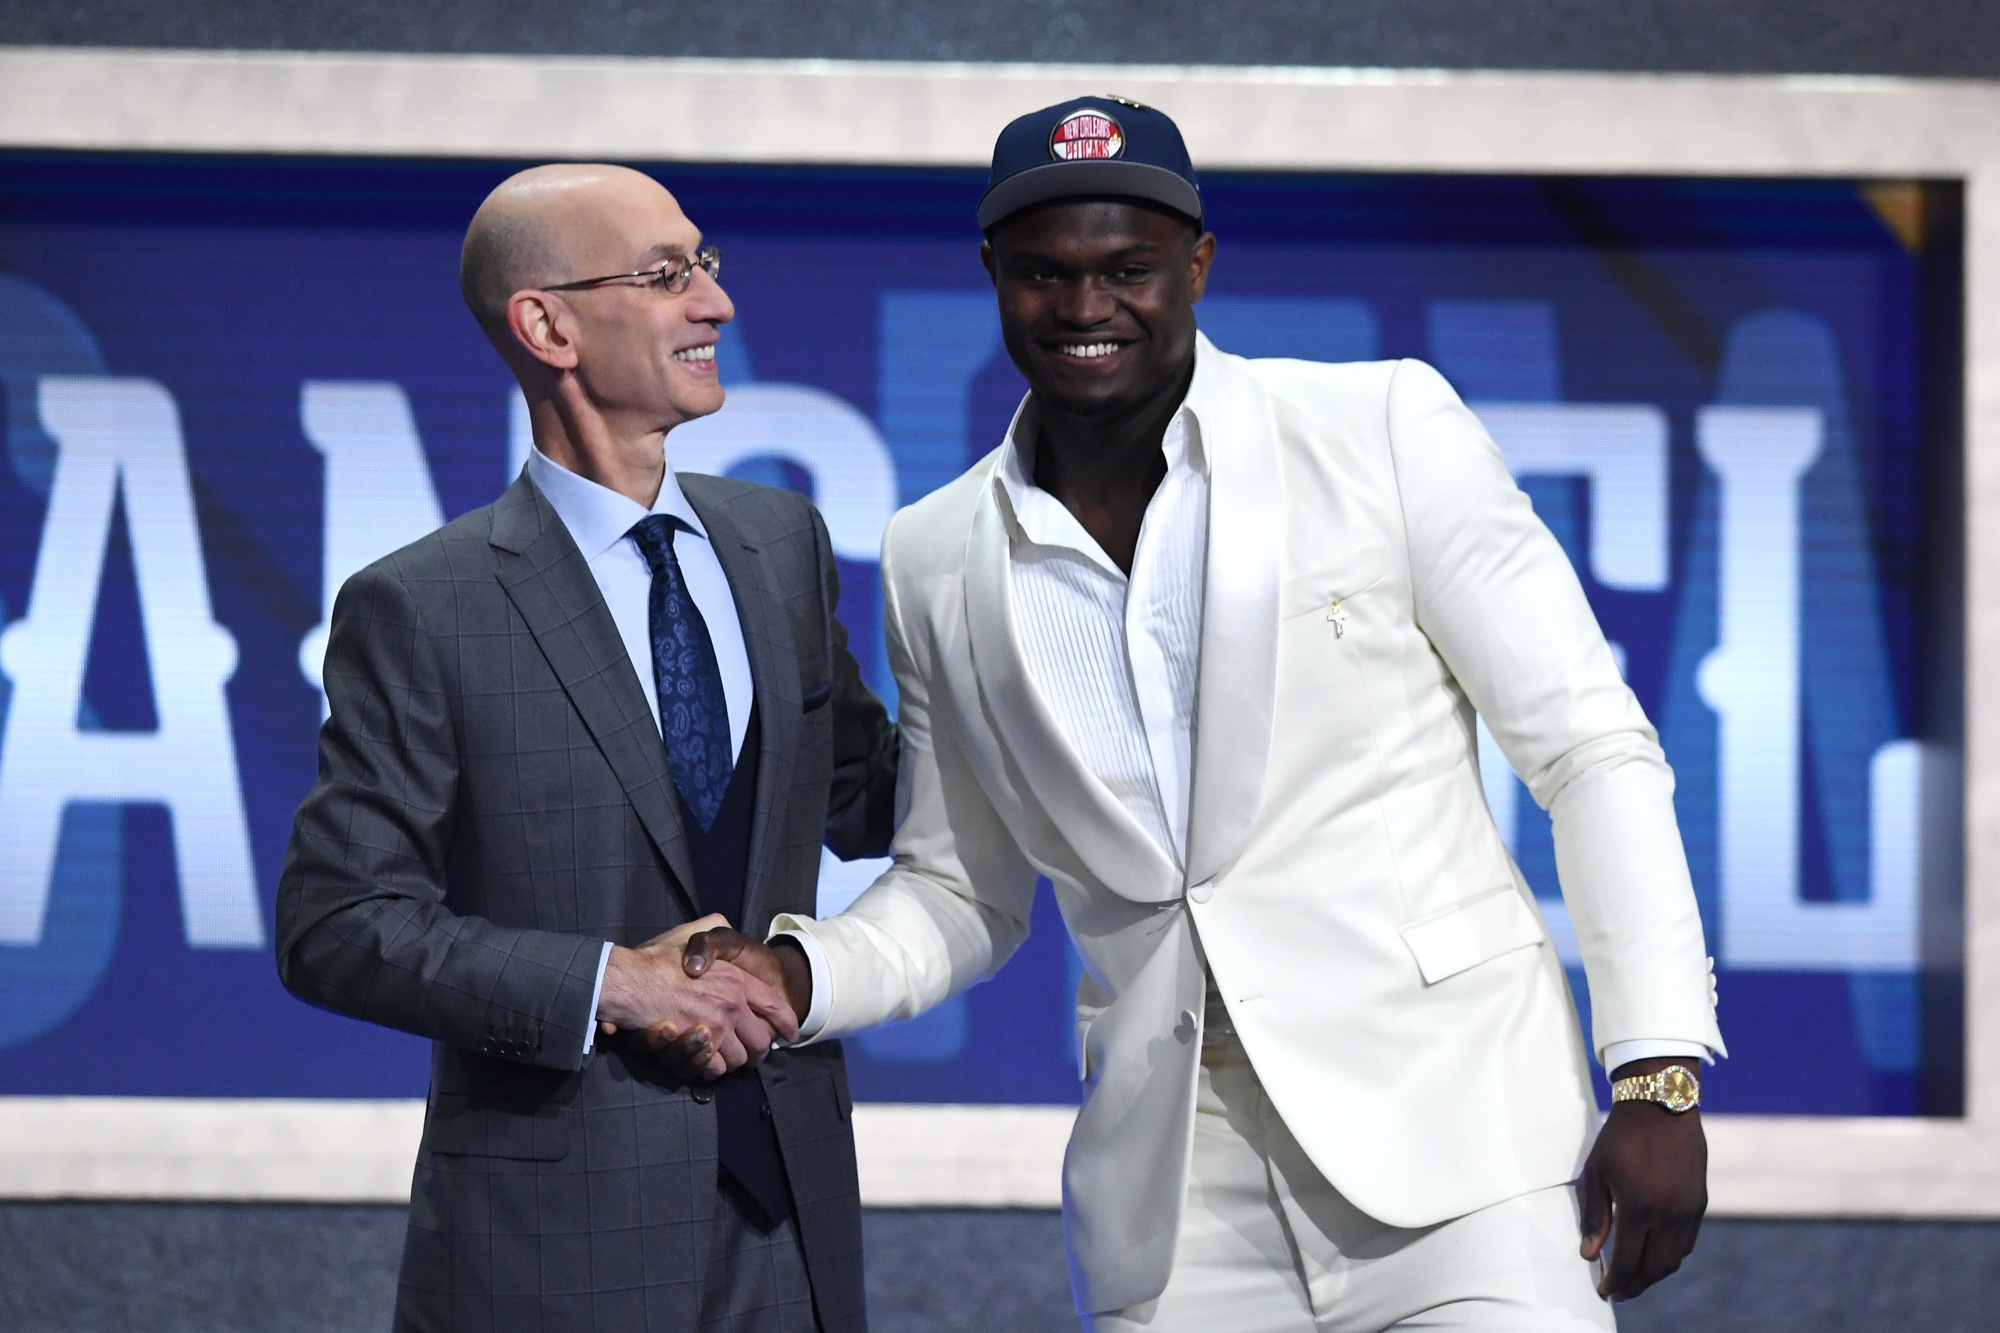 The Nigerian influence over the 2020 NBA draft